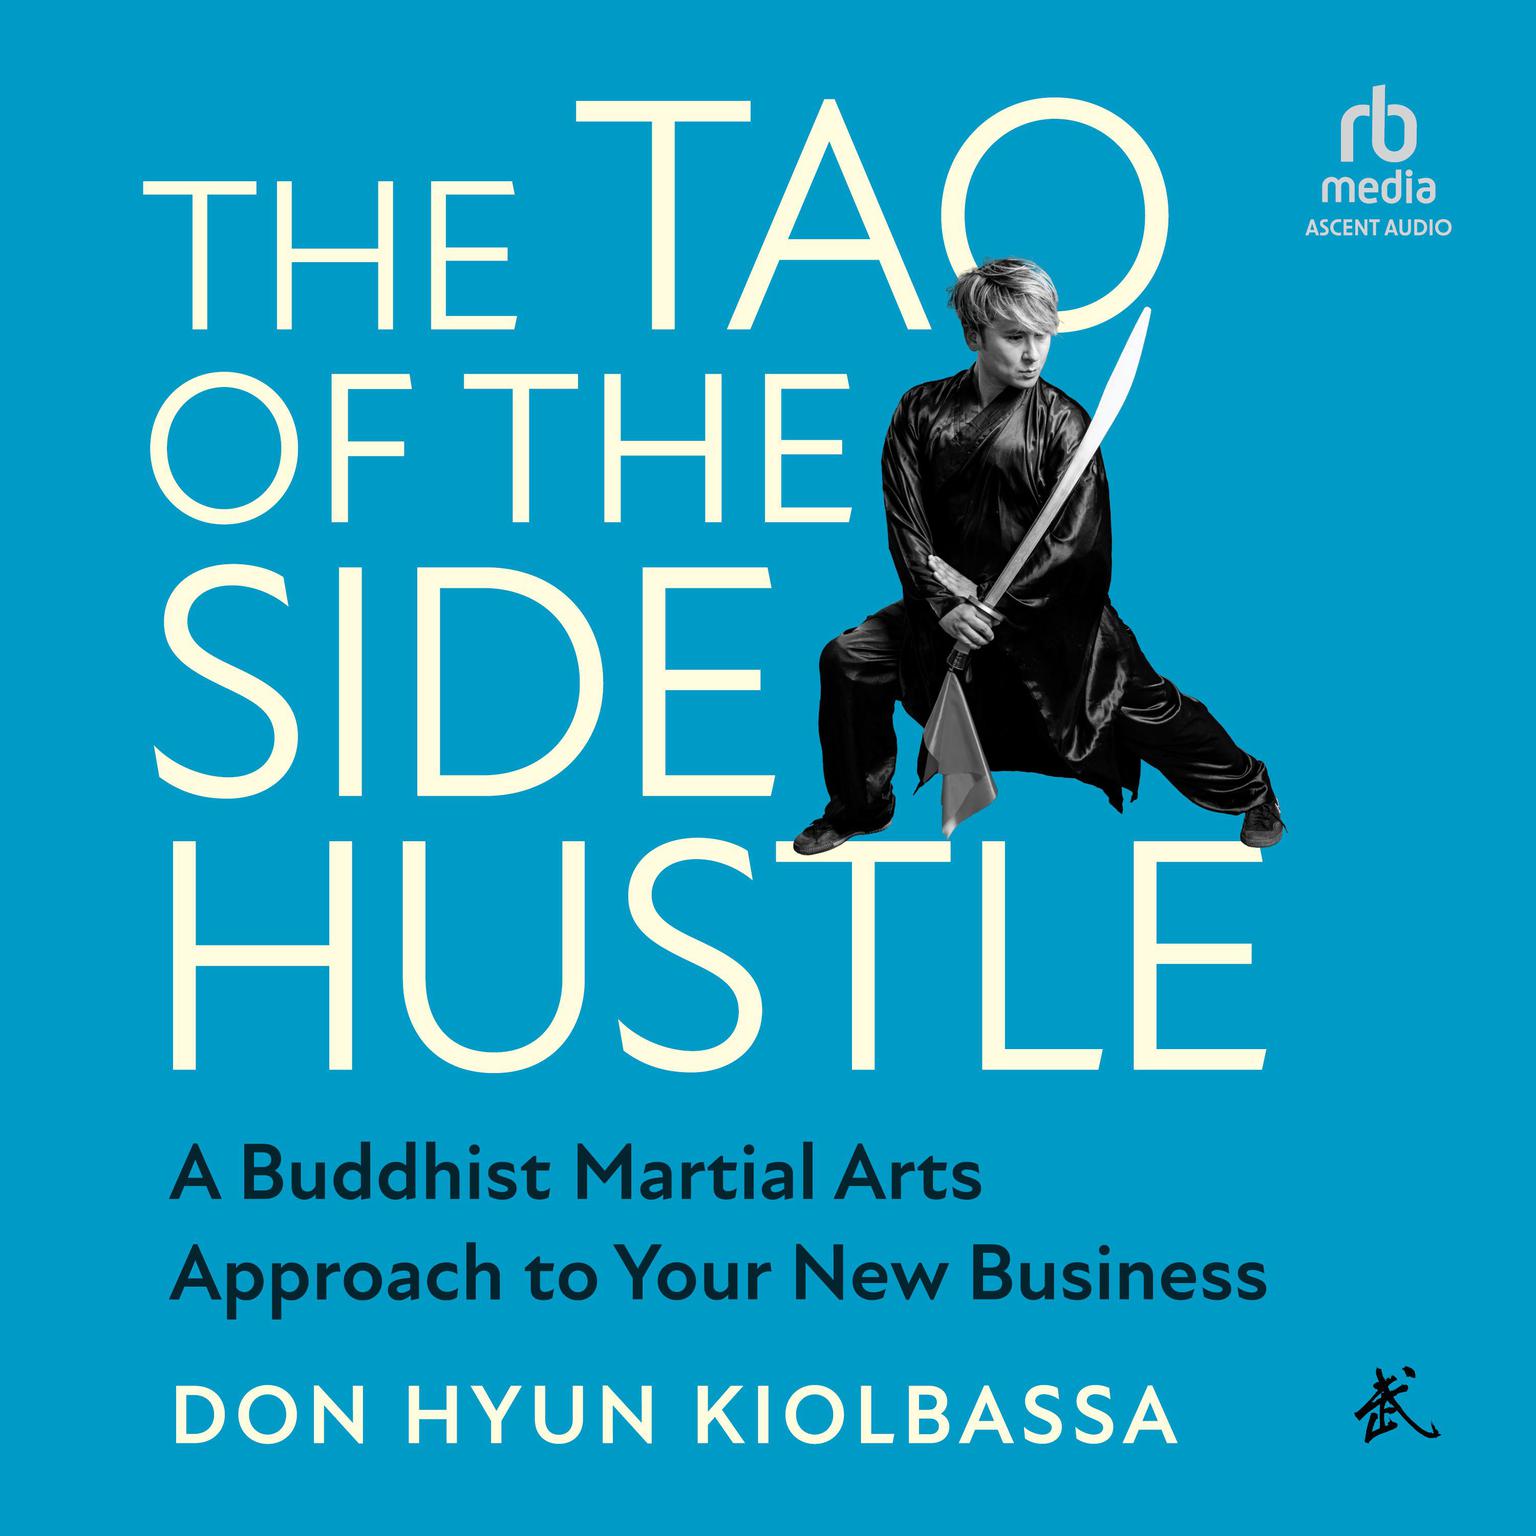 The Tao of the Side Hustle: A Buddhist Martial Arts Approach to Your New Business Audiobook, by Don Hyun Kiolbassa